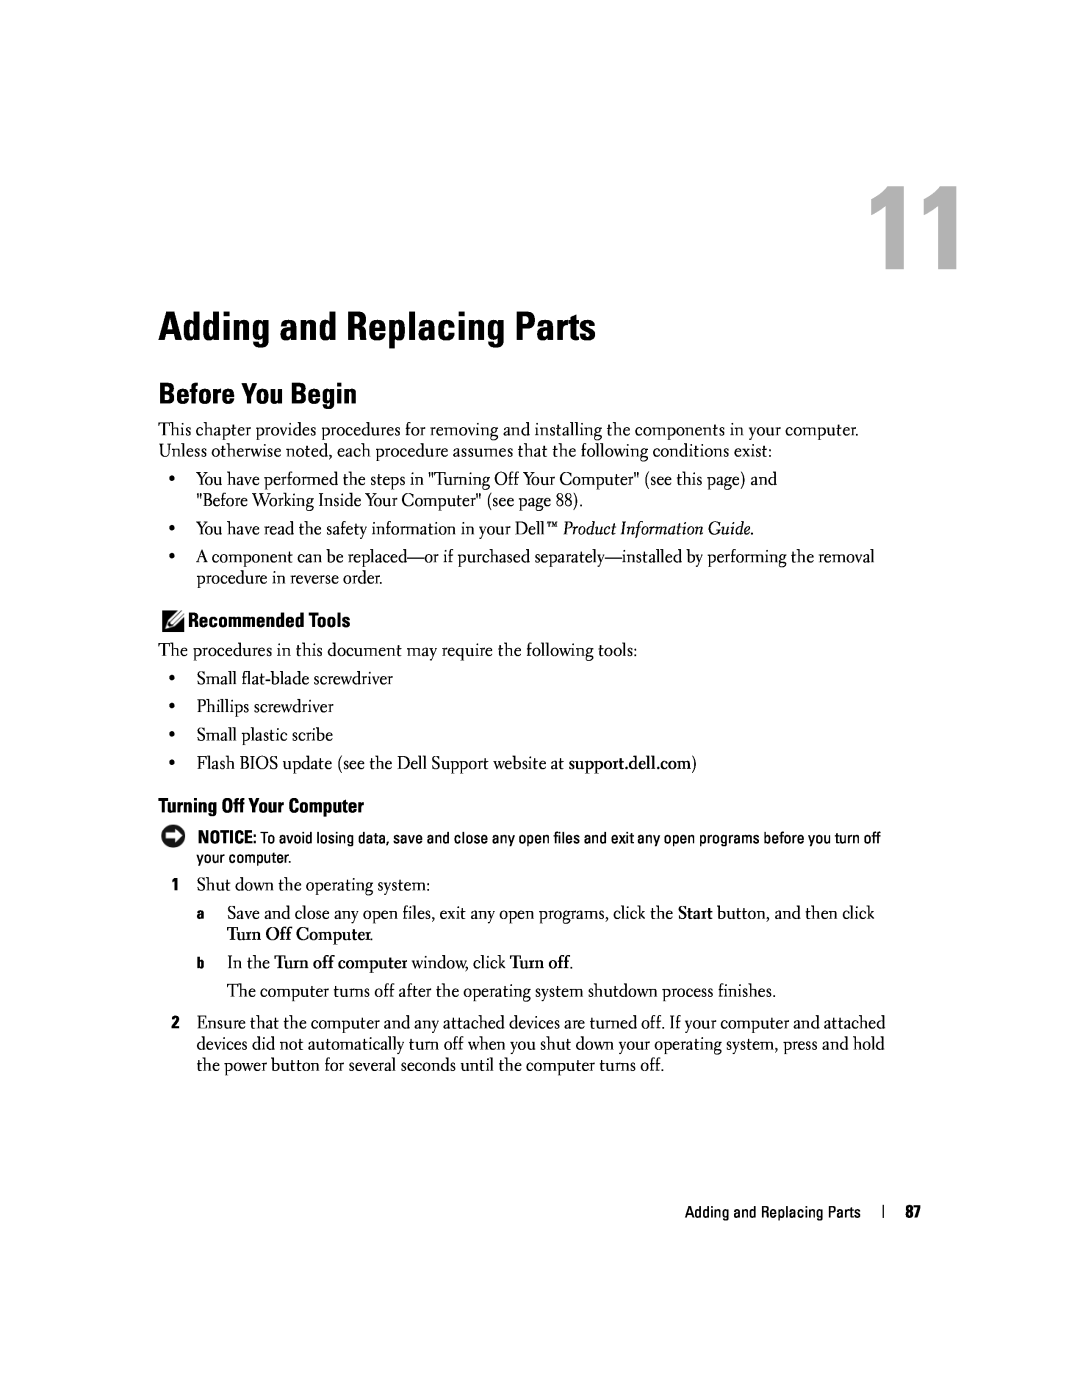 Dell 1501 owner manual Adding and Replacing Parts, Before You Begin, Recommended Tools, Turning Off Your Computer 